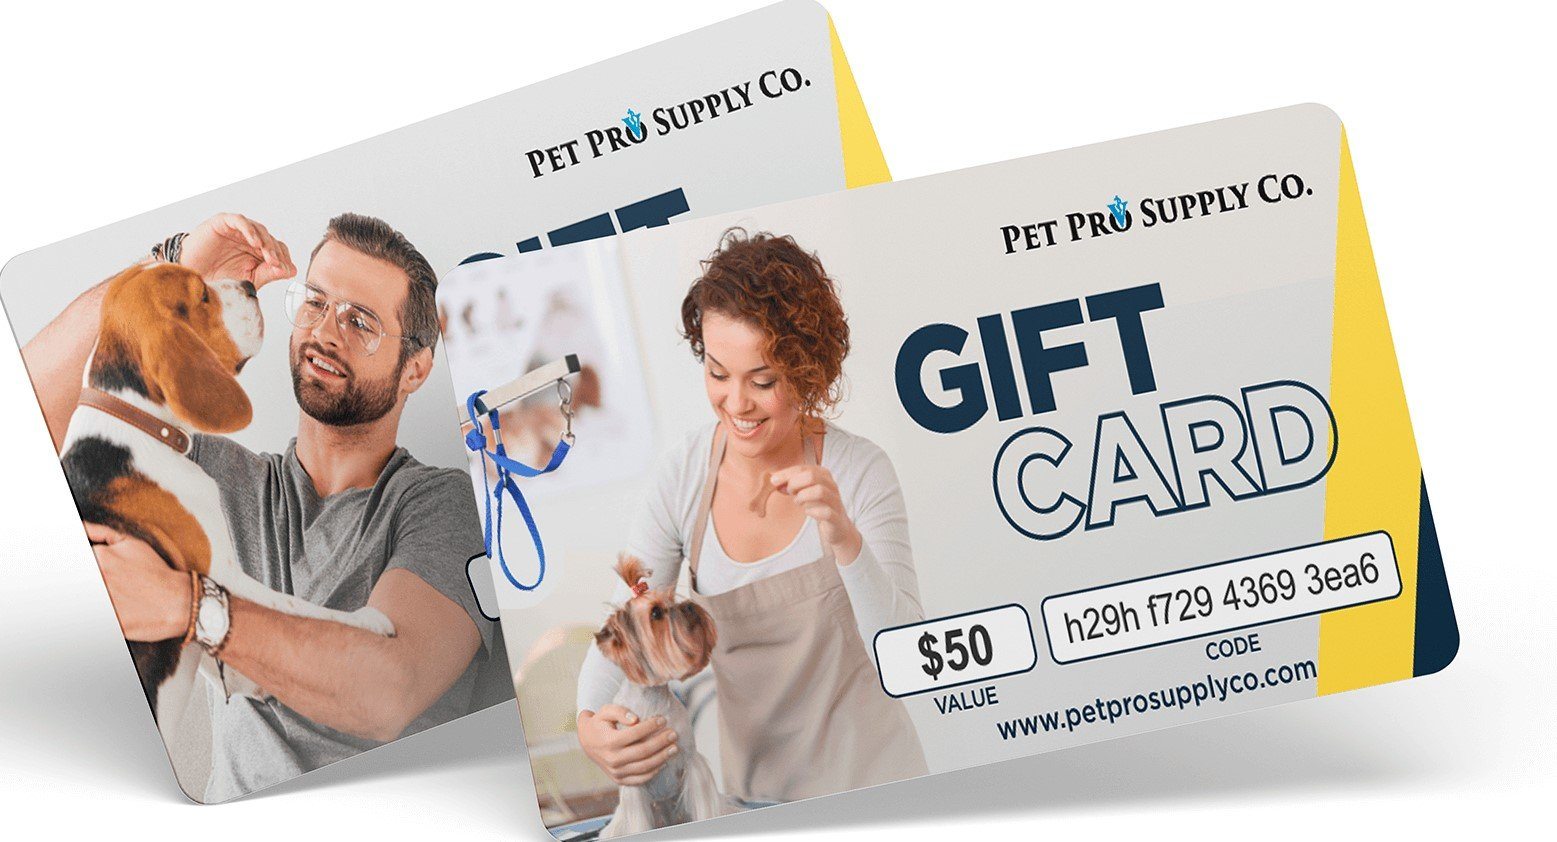 Gift Cards at Pet Pro Supply Co.!